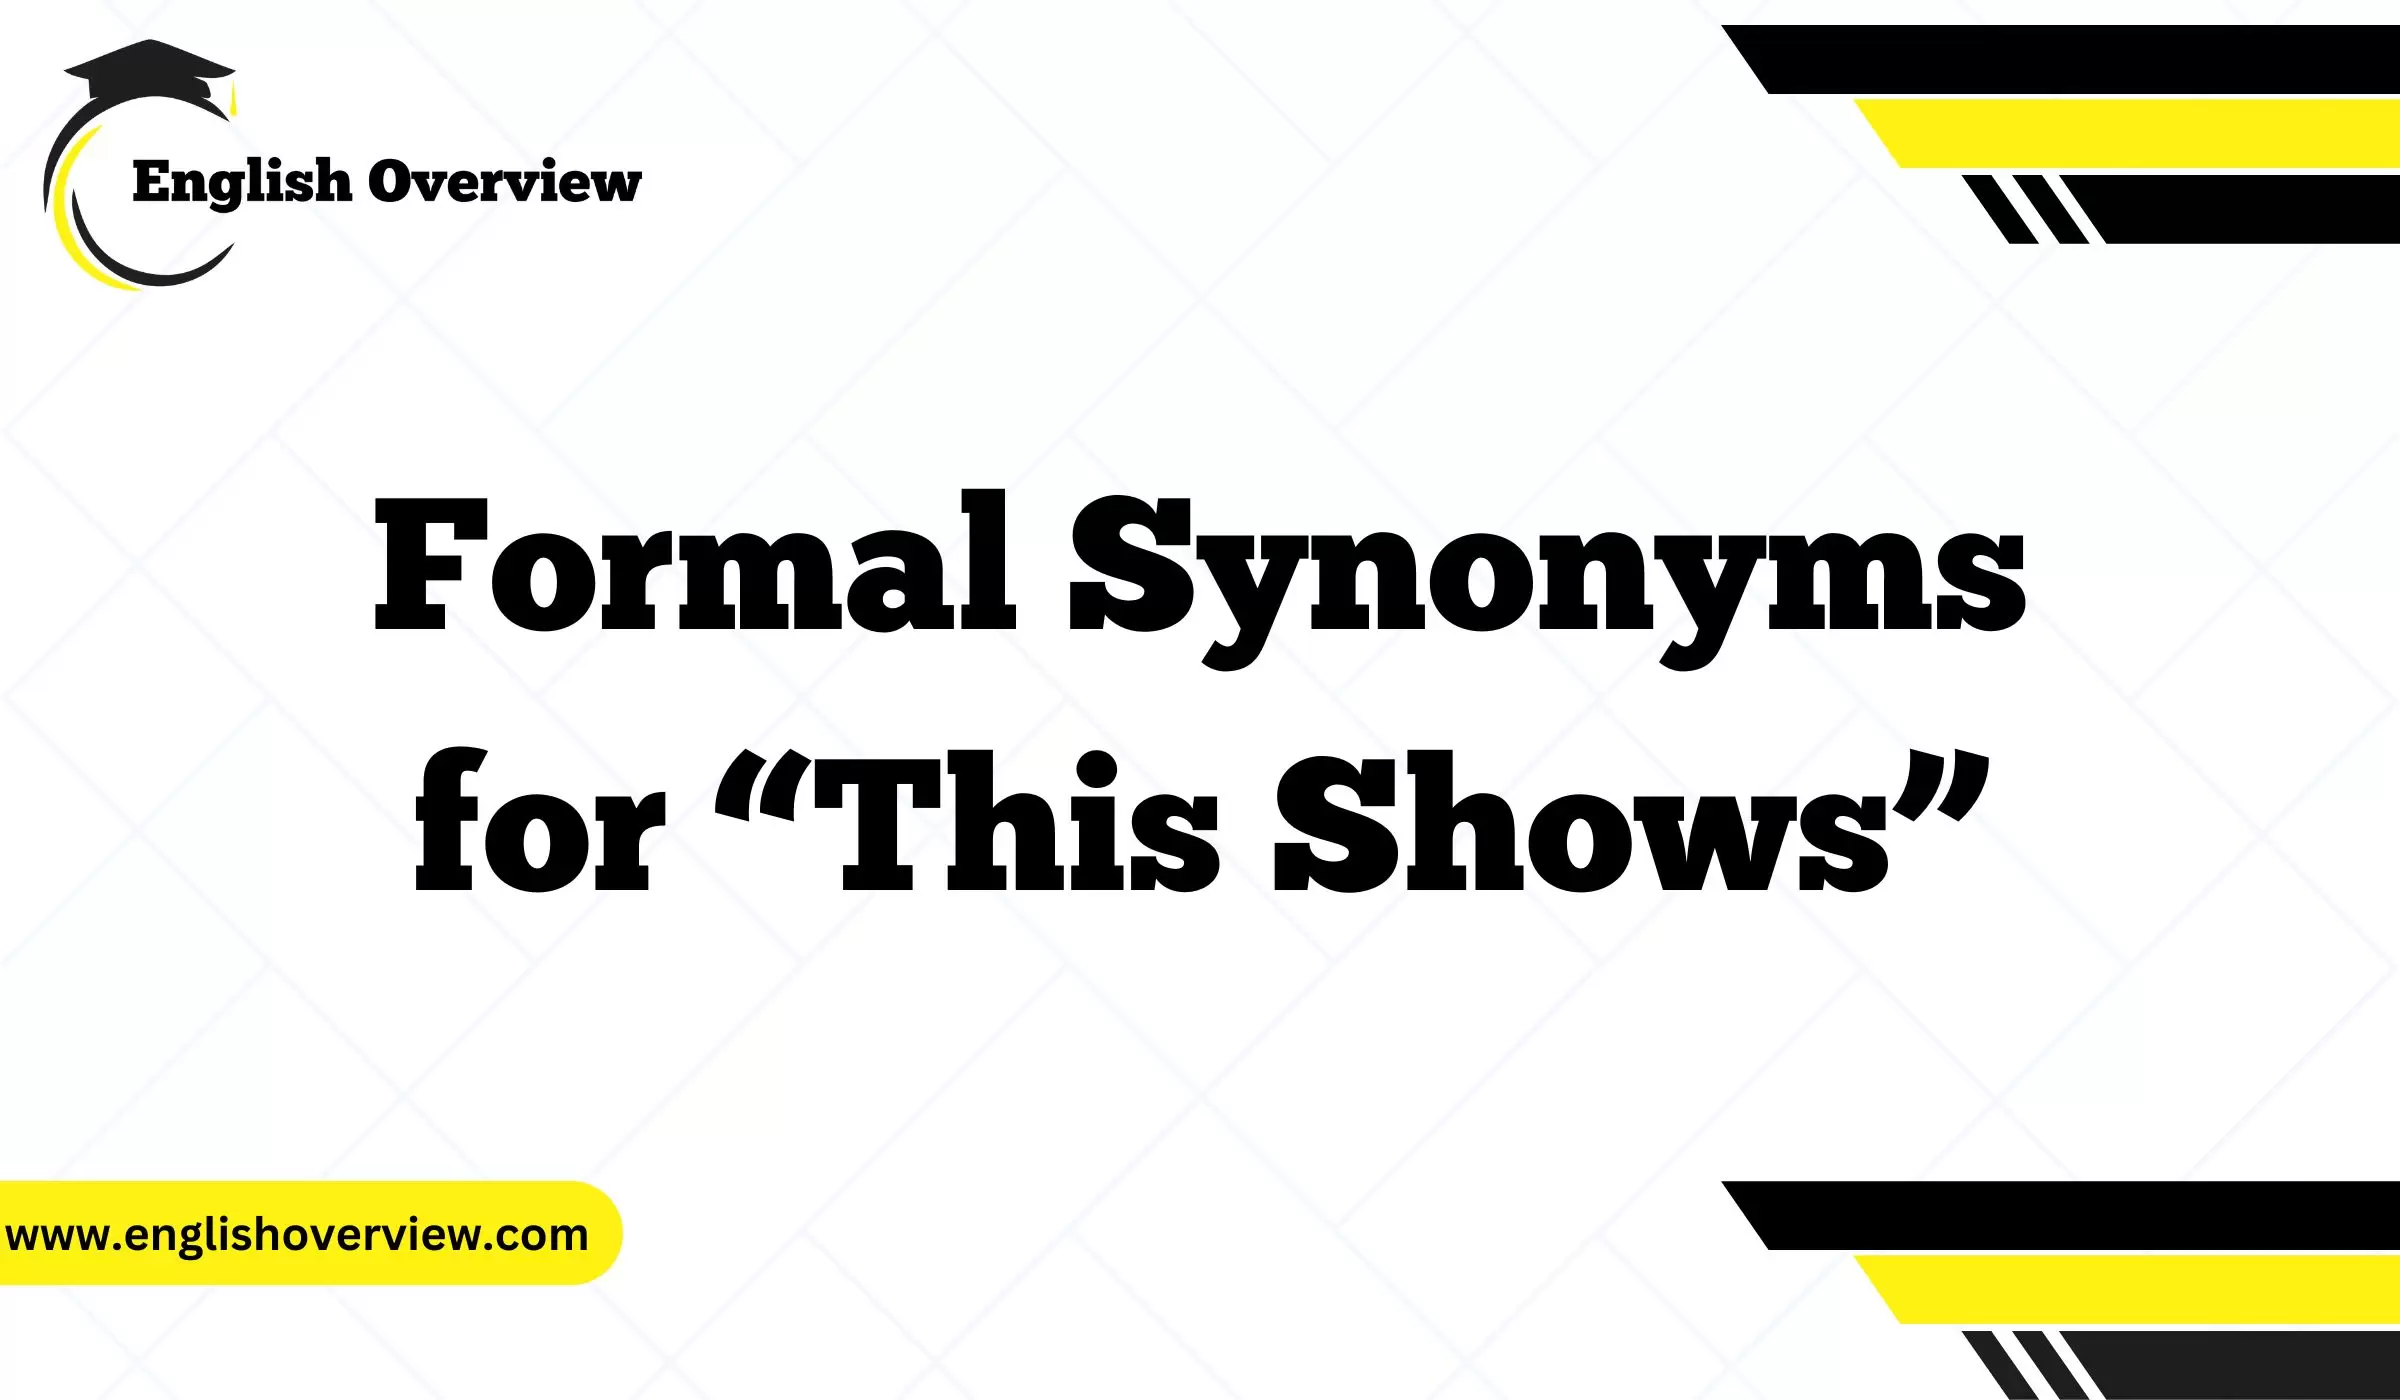 Formal Synonyms for “This Shows”